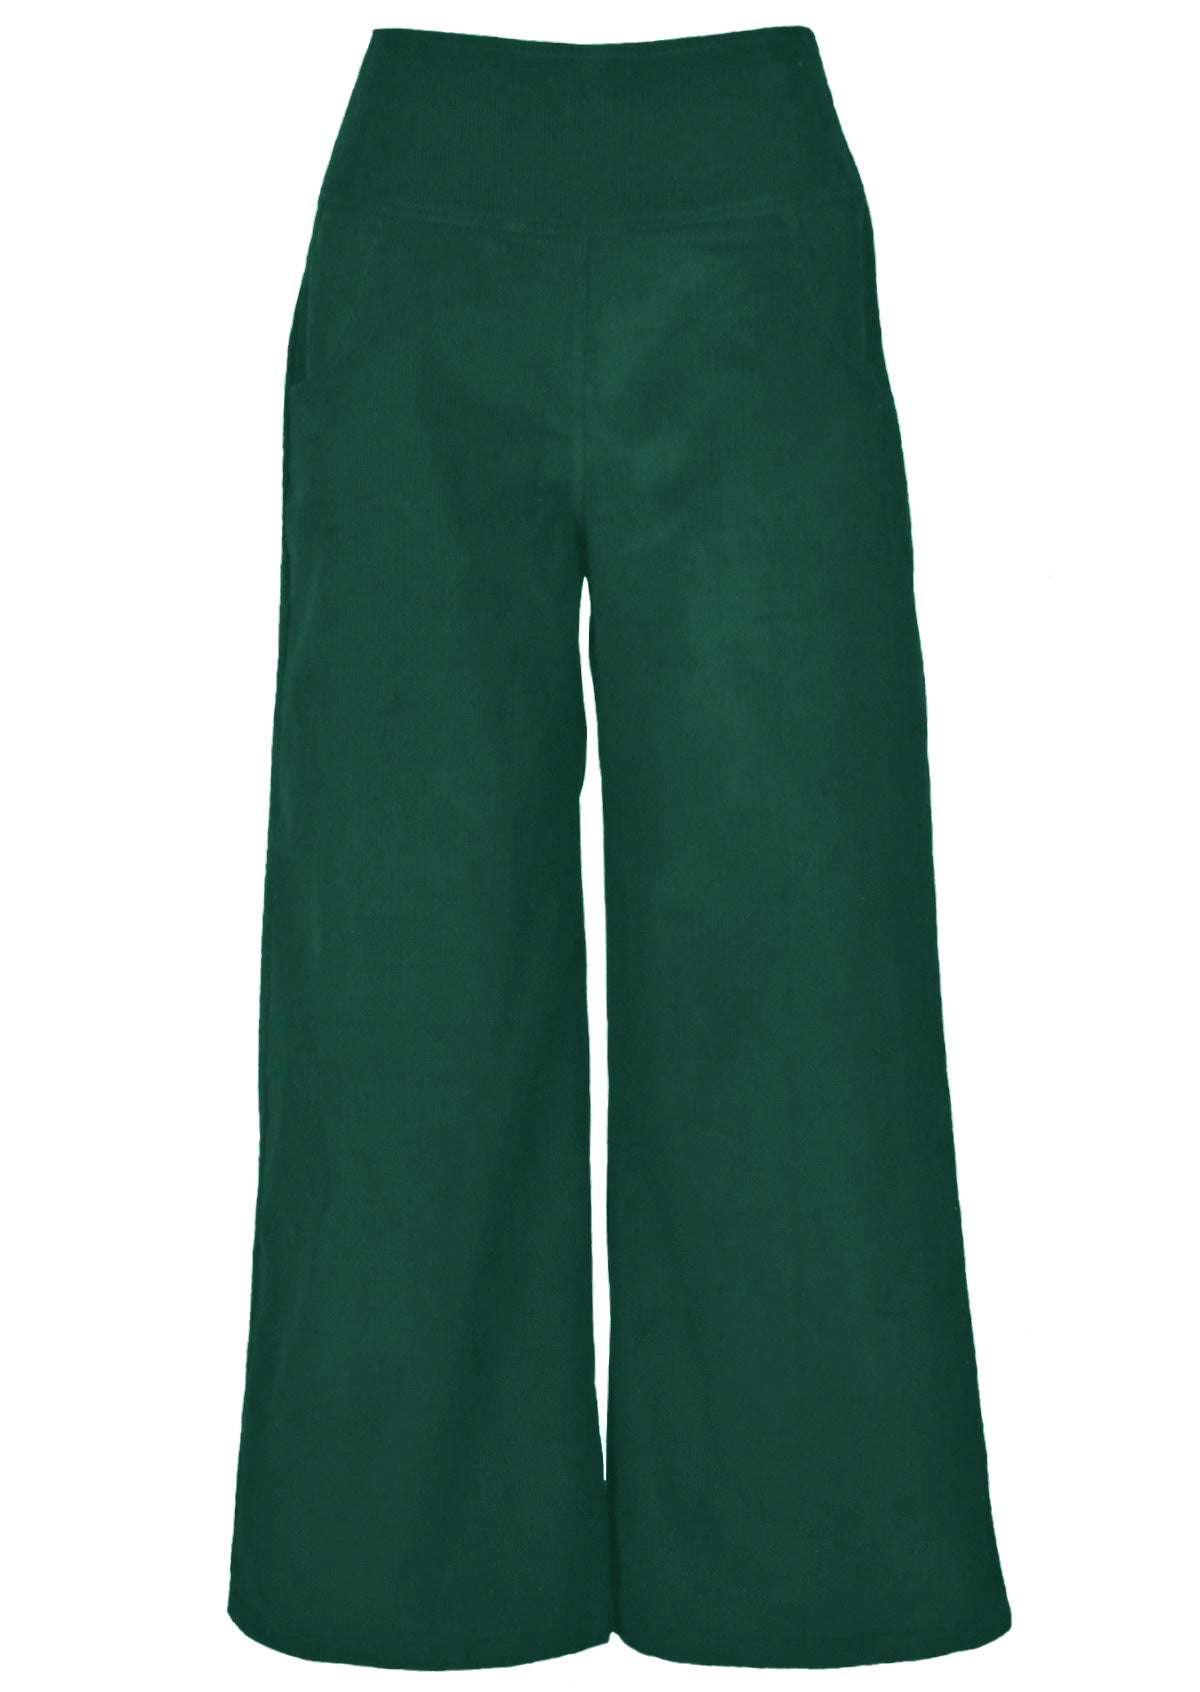 100% cotton corduroy pants have pockets and a high waist. 